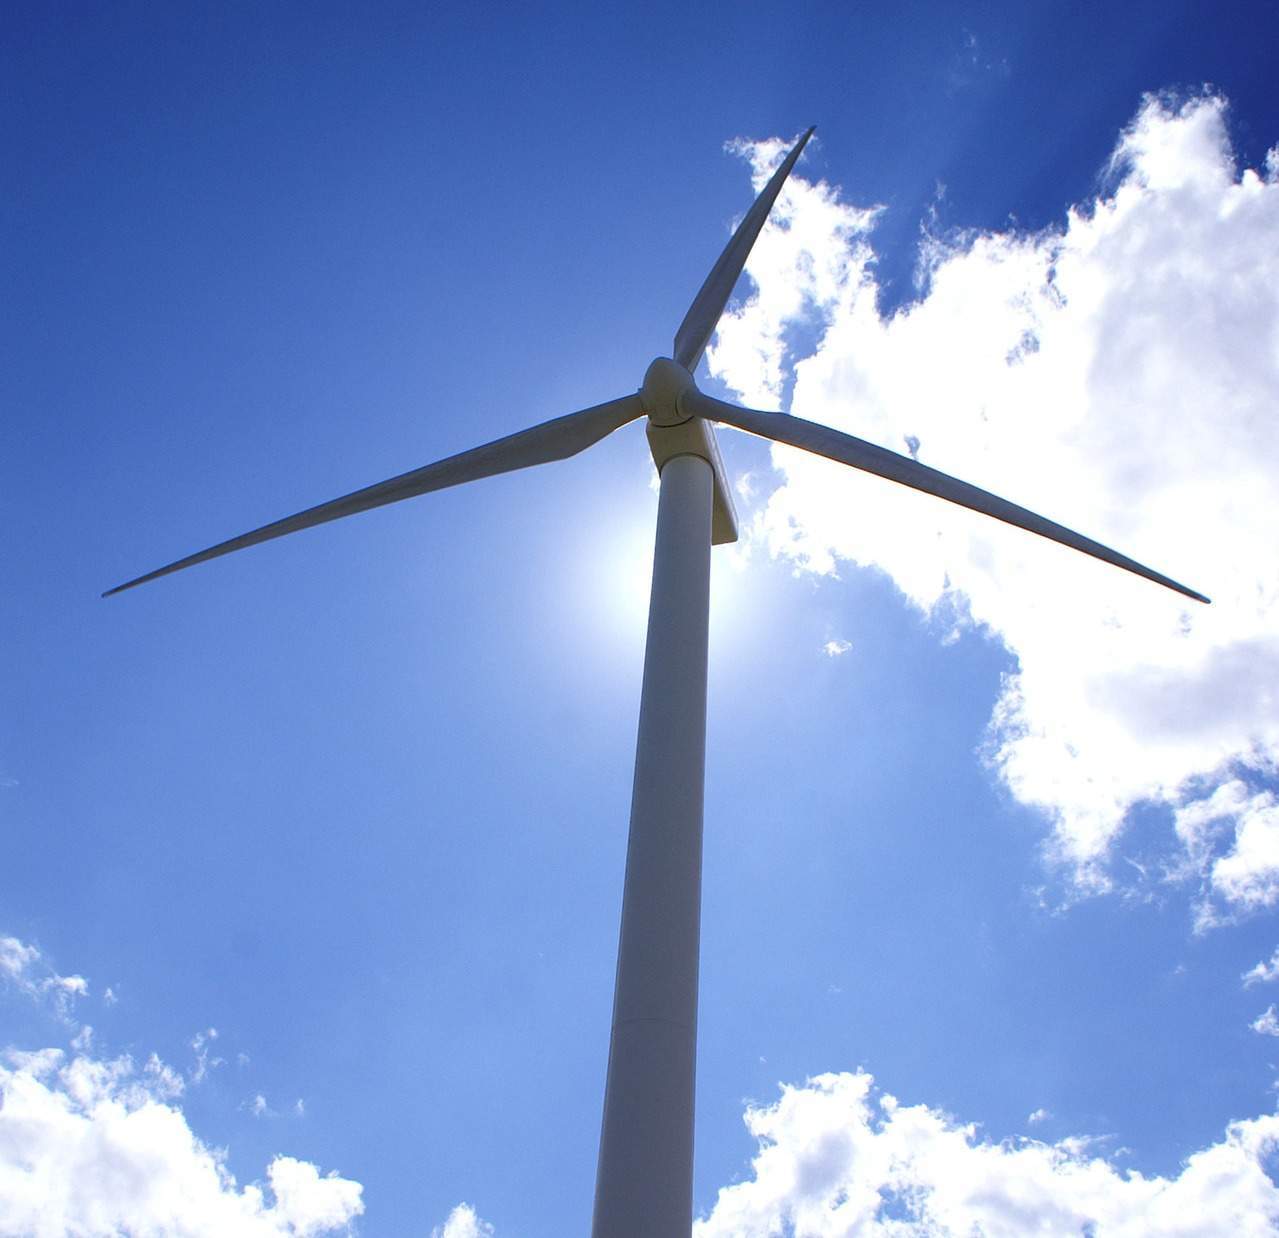 Novartis signs virtual PPA for Invenergy’s100MW wind farm in Texas